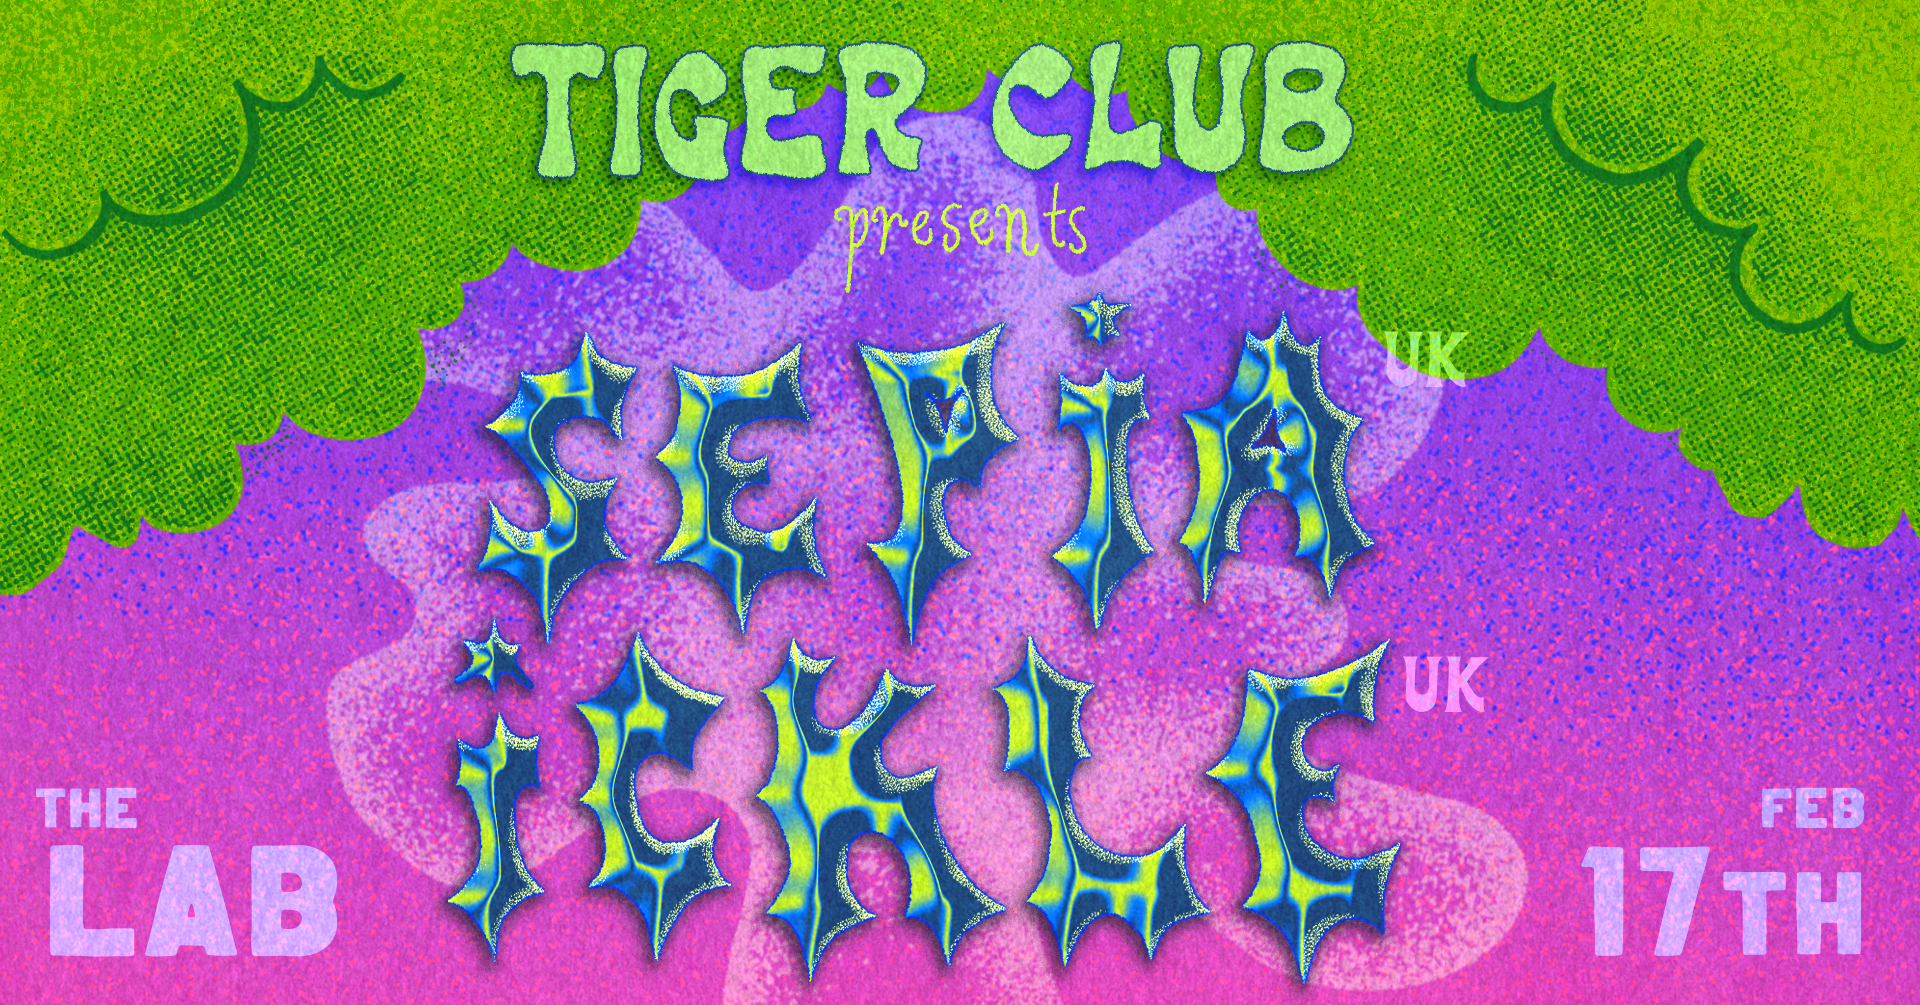 'DM for Address' #1: TIGER CLUB + The Lab, feat Sepia (UK), iCKLE (UK) + more - フライヤー表